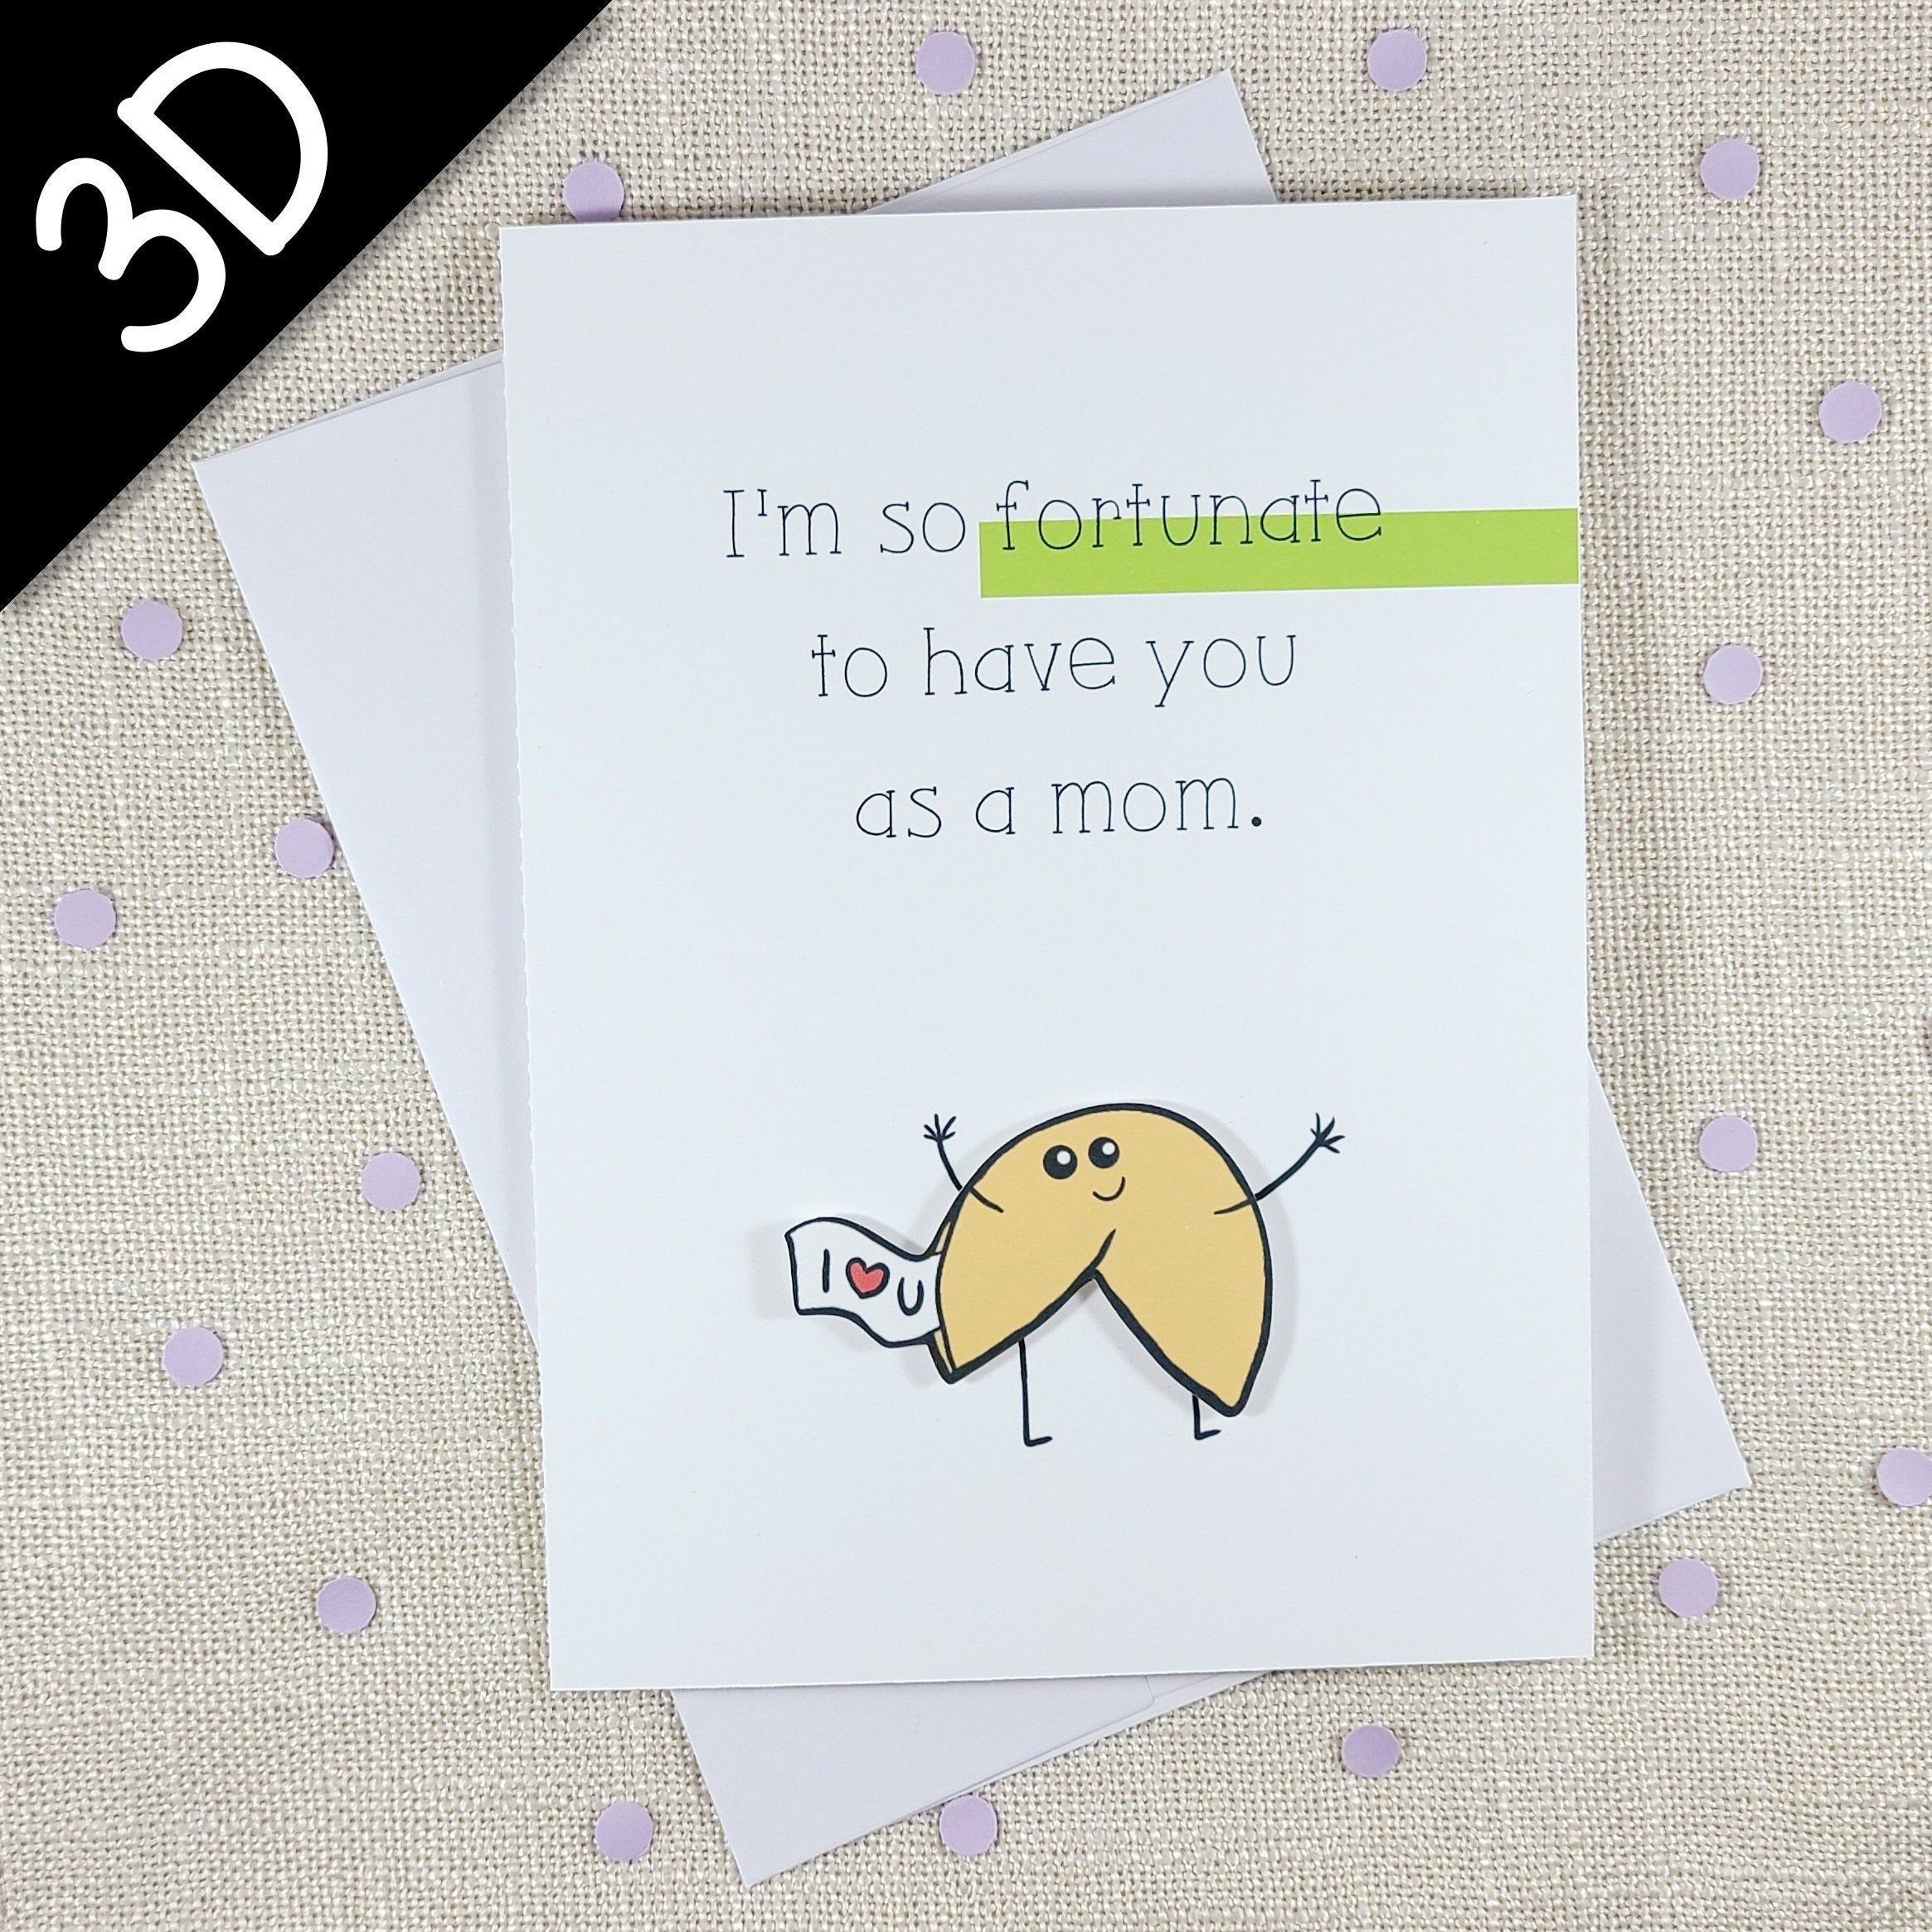 Fortune Cookie Mother's Day Card | Happy Mother's Day | Mom Birthday Card | Funny Pun Card | Cute Funny Card | Handmade Greeting Card -   19 holiday DIY mother’s day ideas